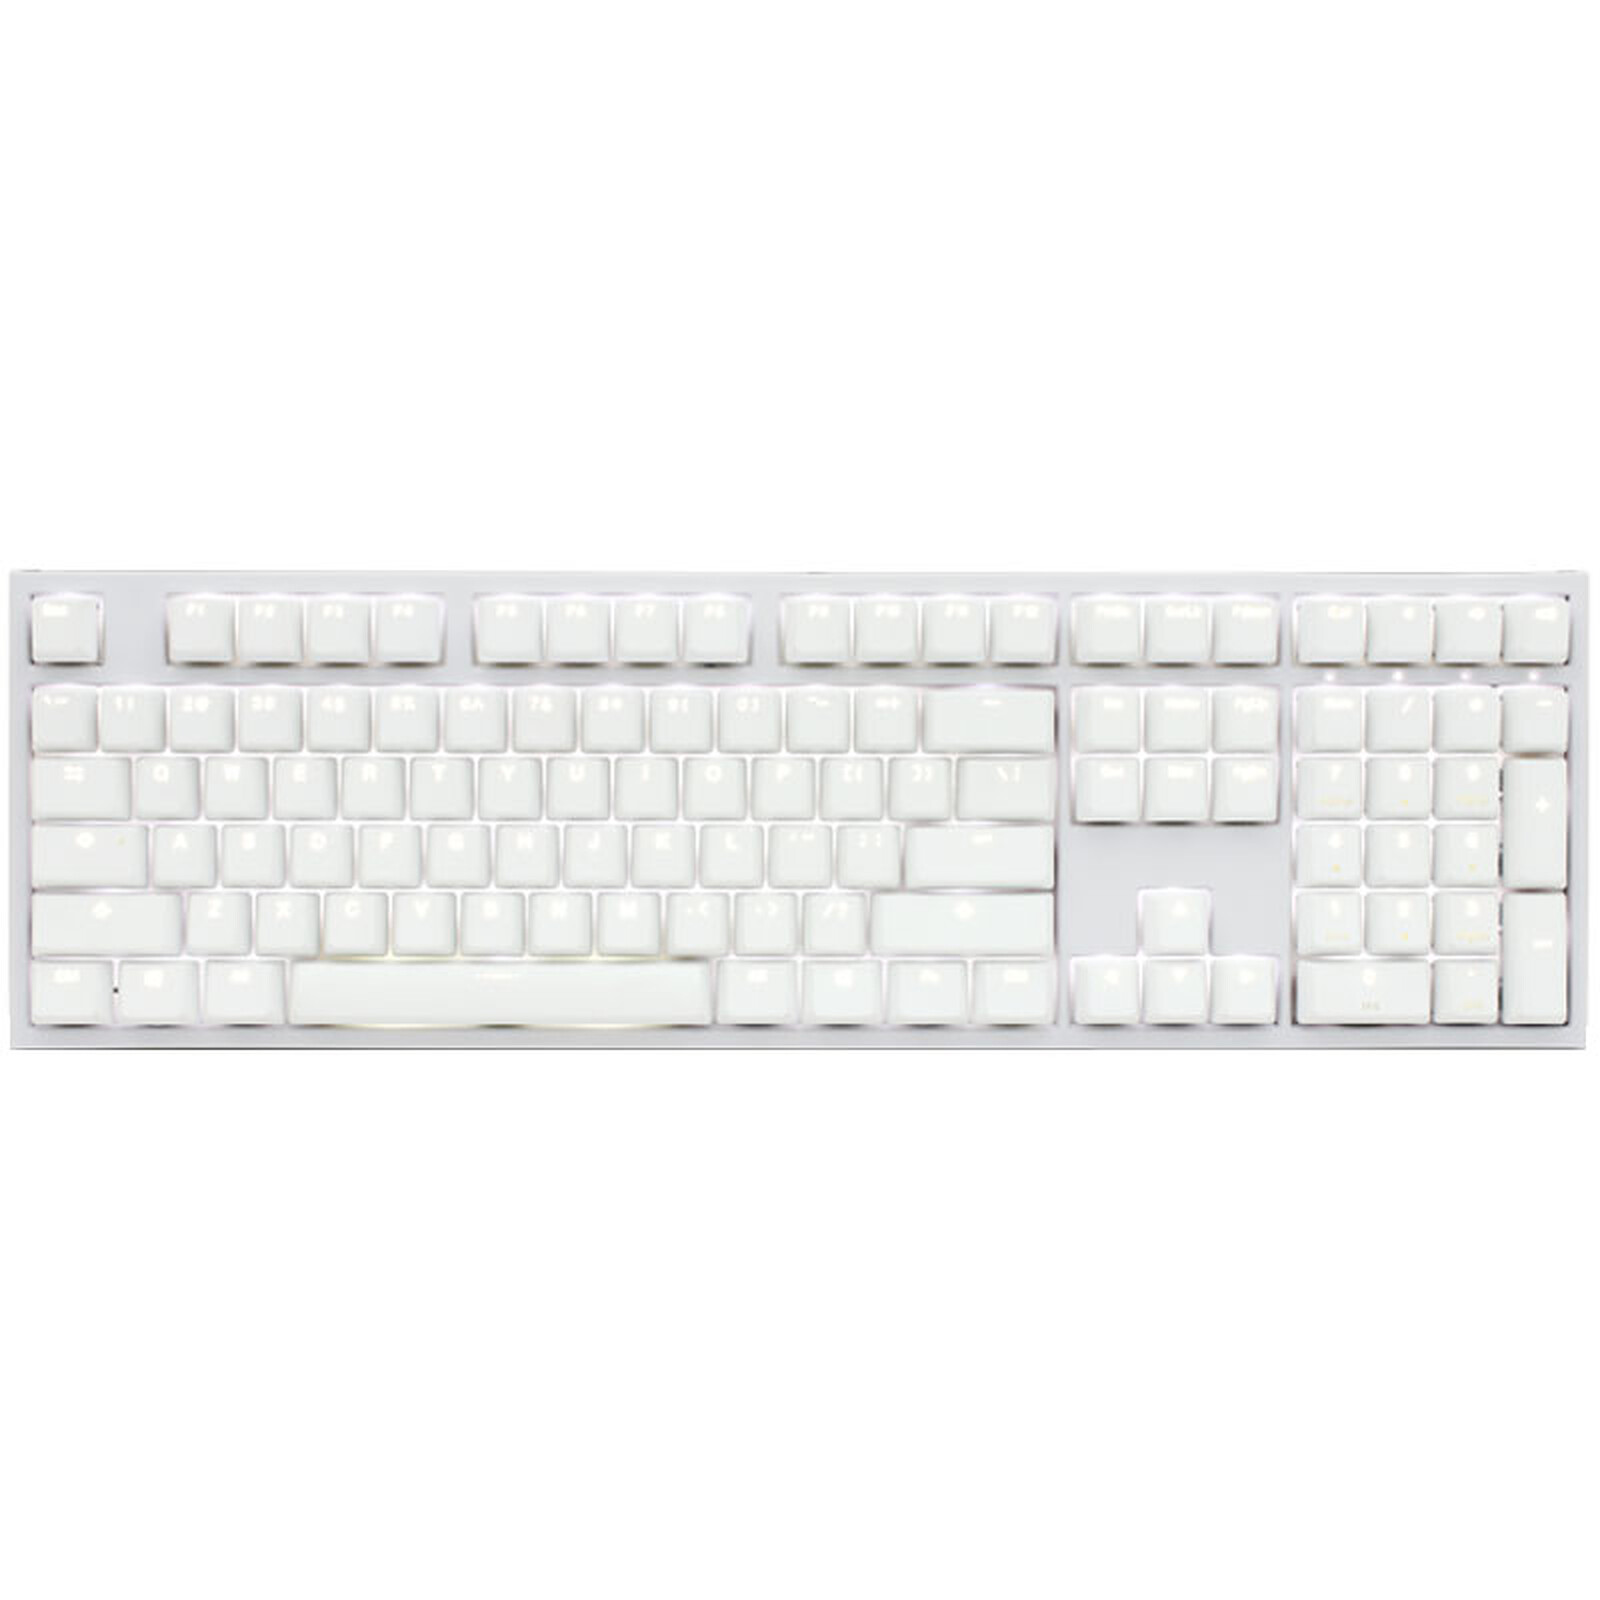 Ducky Channel One 2 Backlit (coloris blanc - Cherry MX Brown - LEDs blanches)